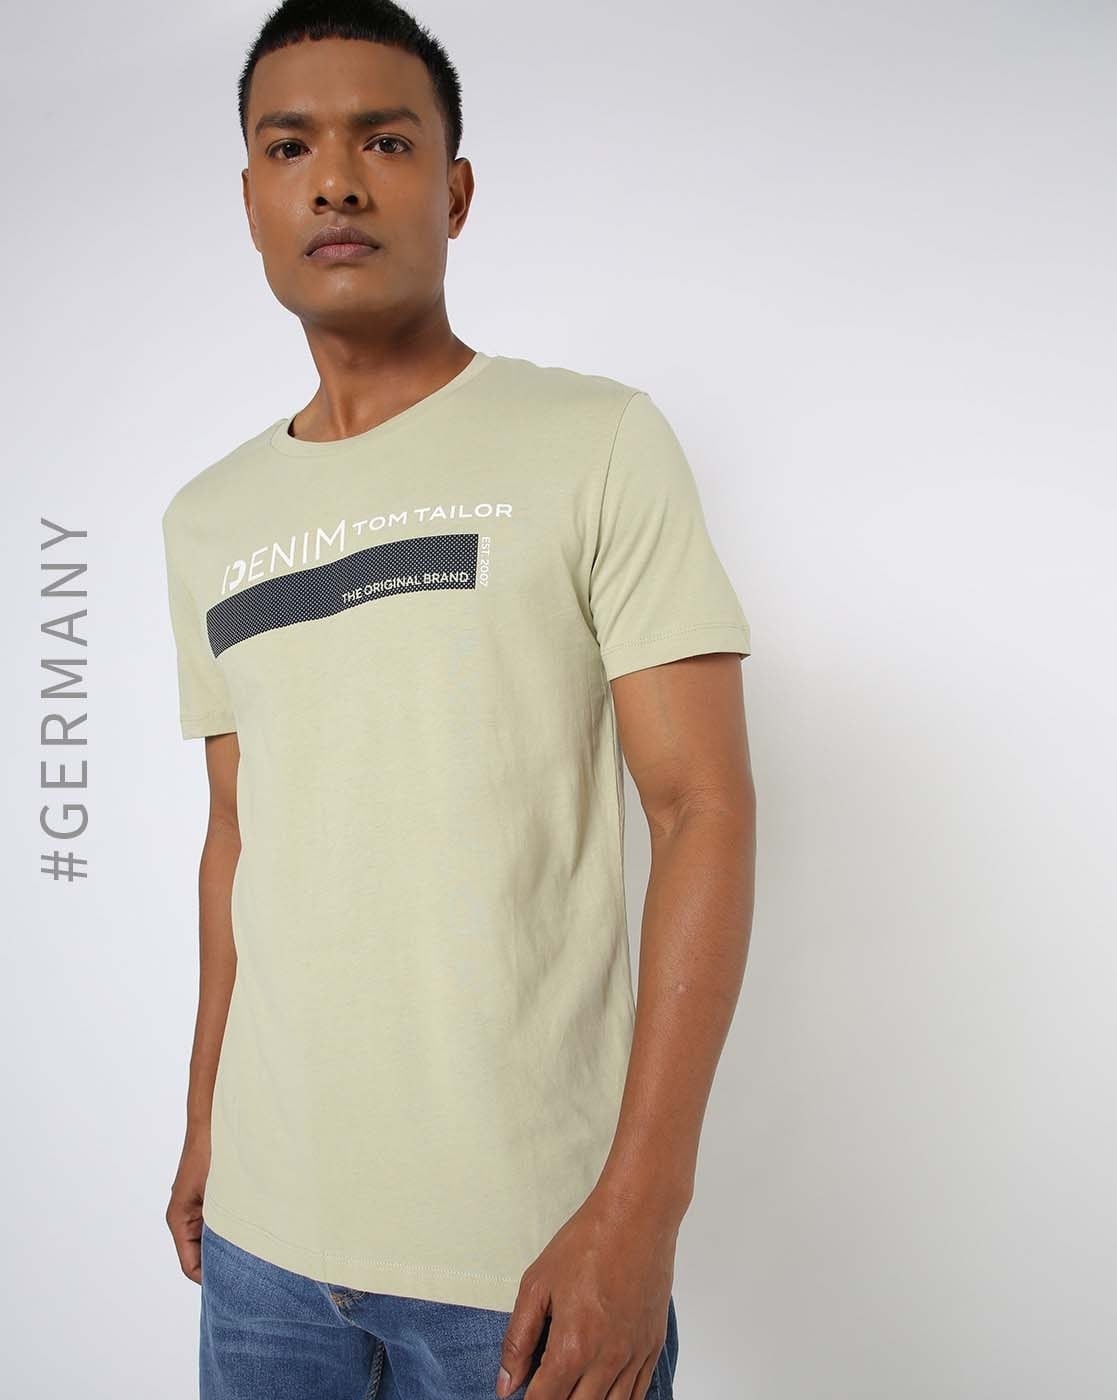 Buy Green Tshirts Men Online for Tailor by Tom